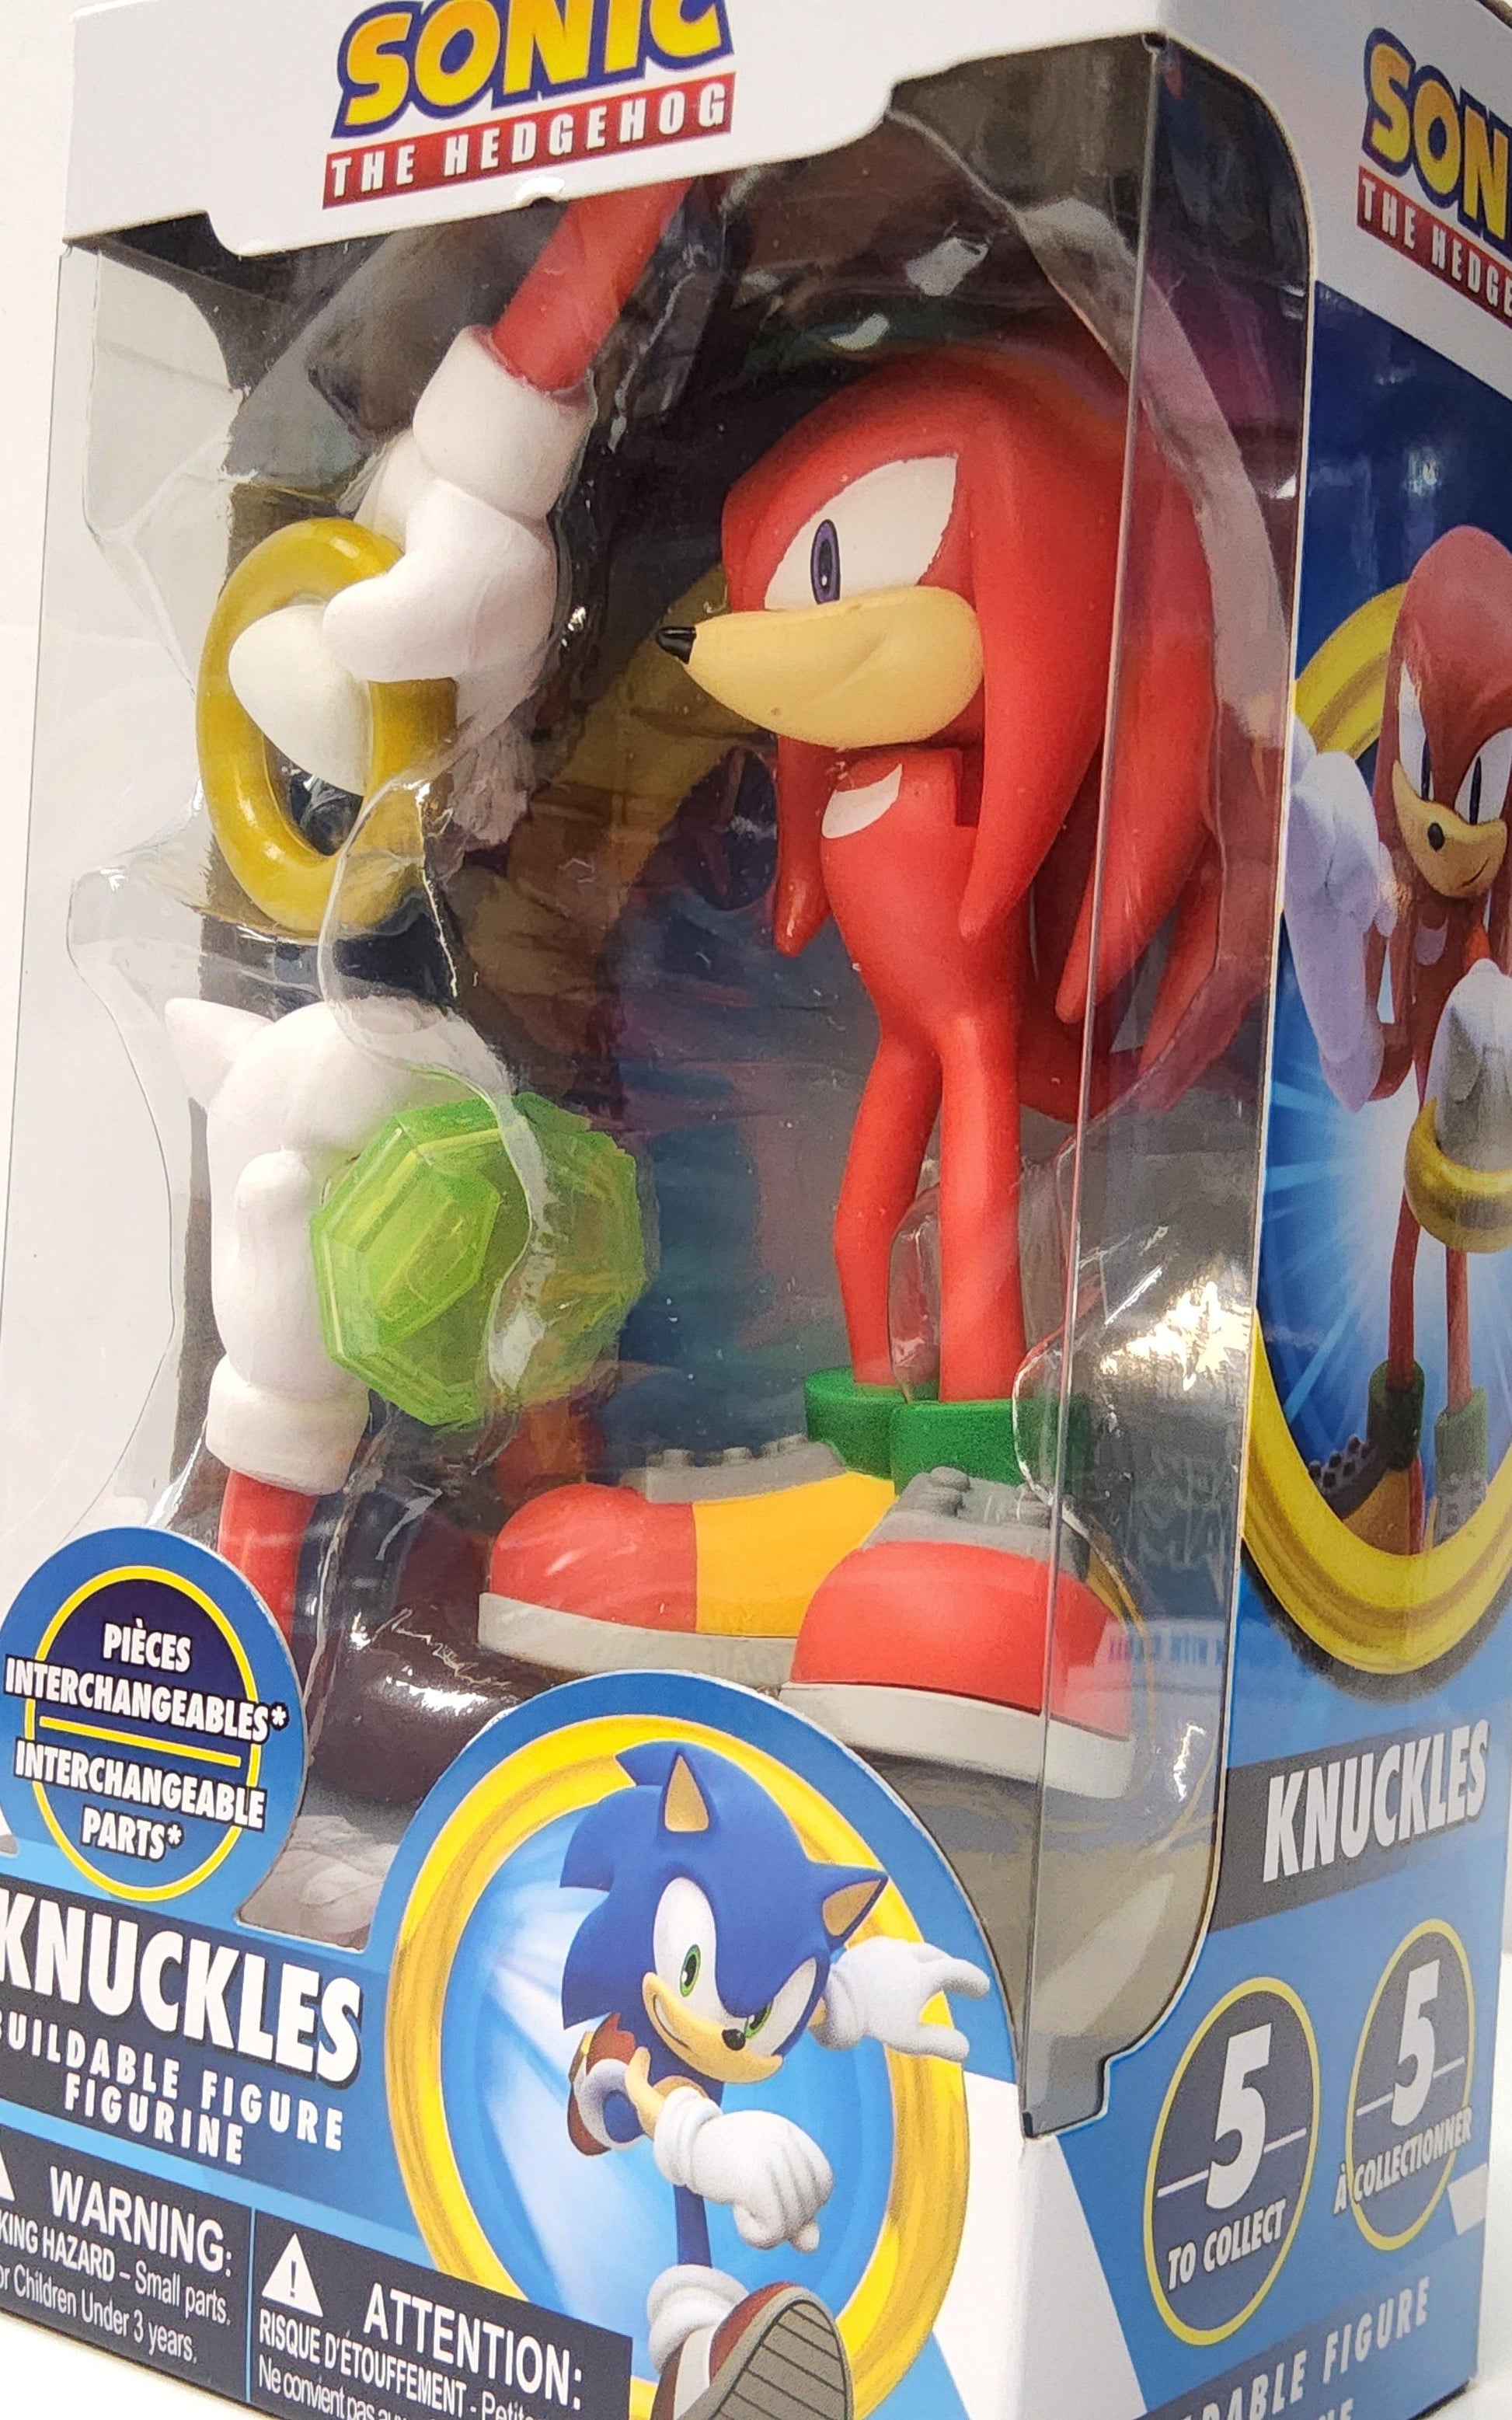 Just Toys INTL Sonic the Hedgehog Knuckles Buildable Figure Figurine - Logan's Toy Chest